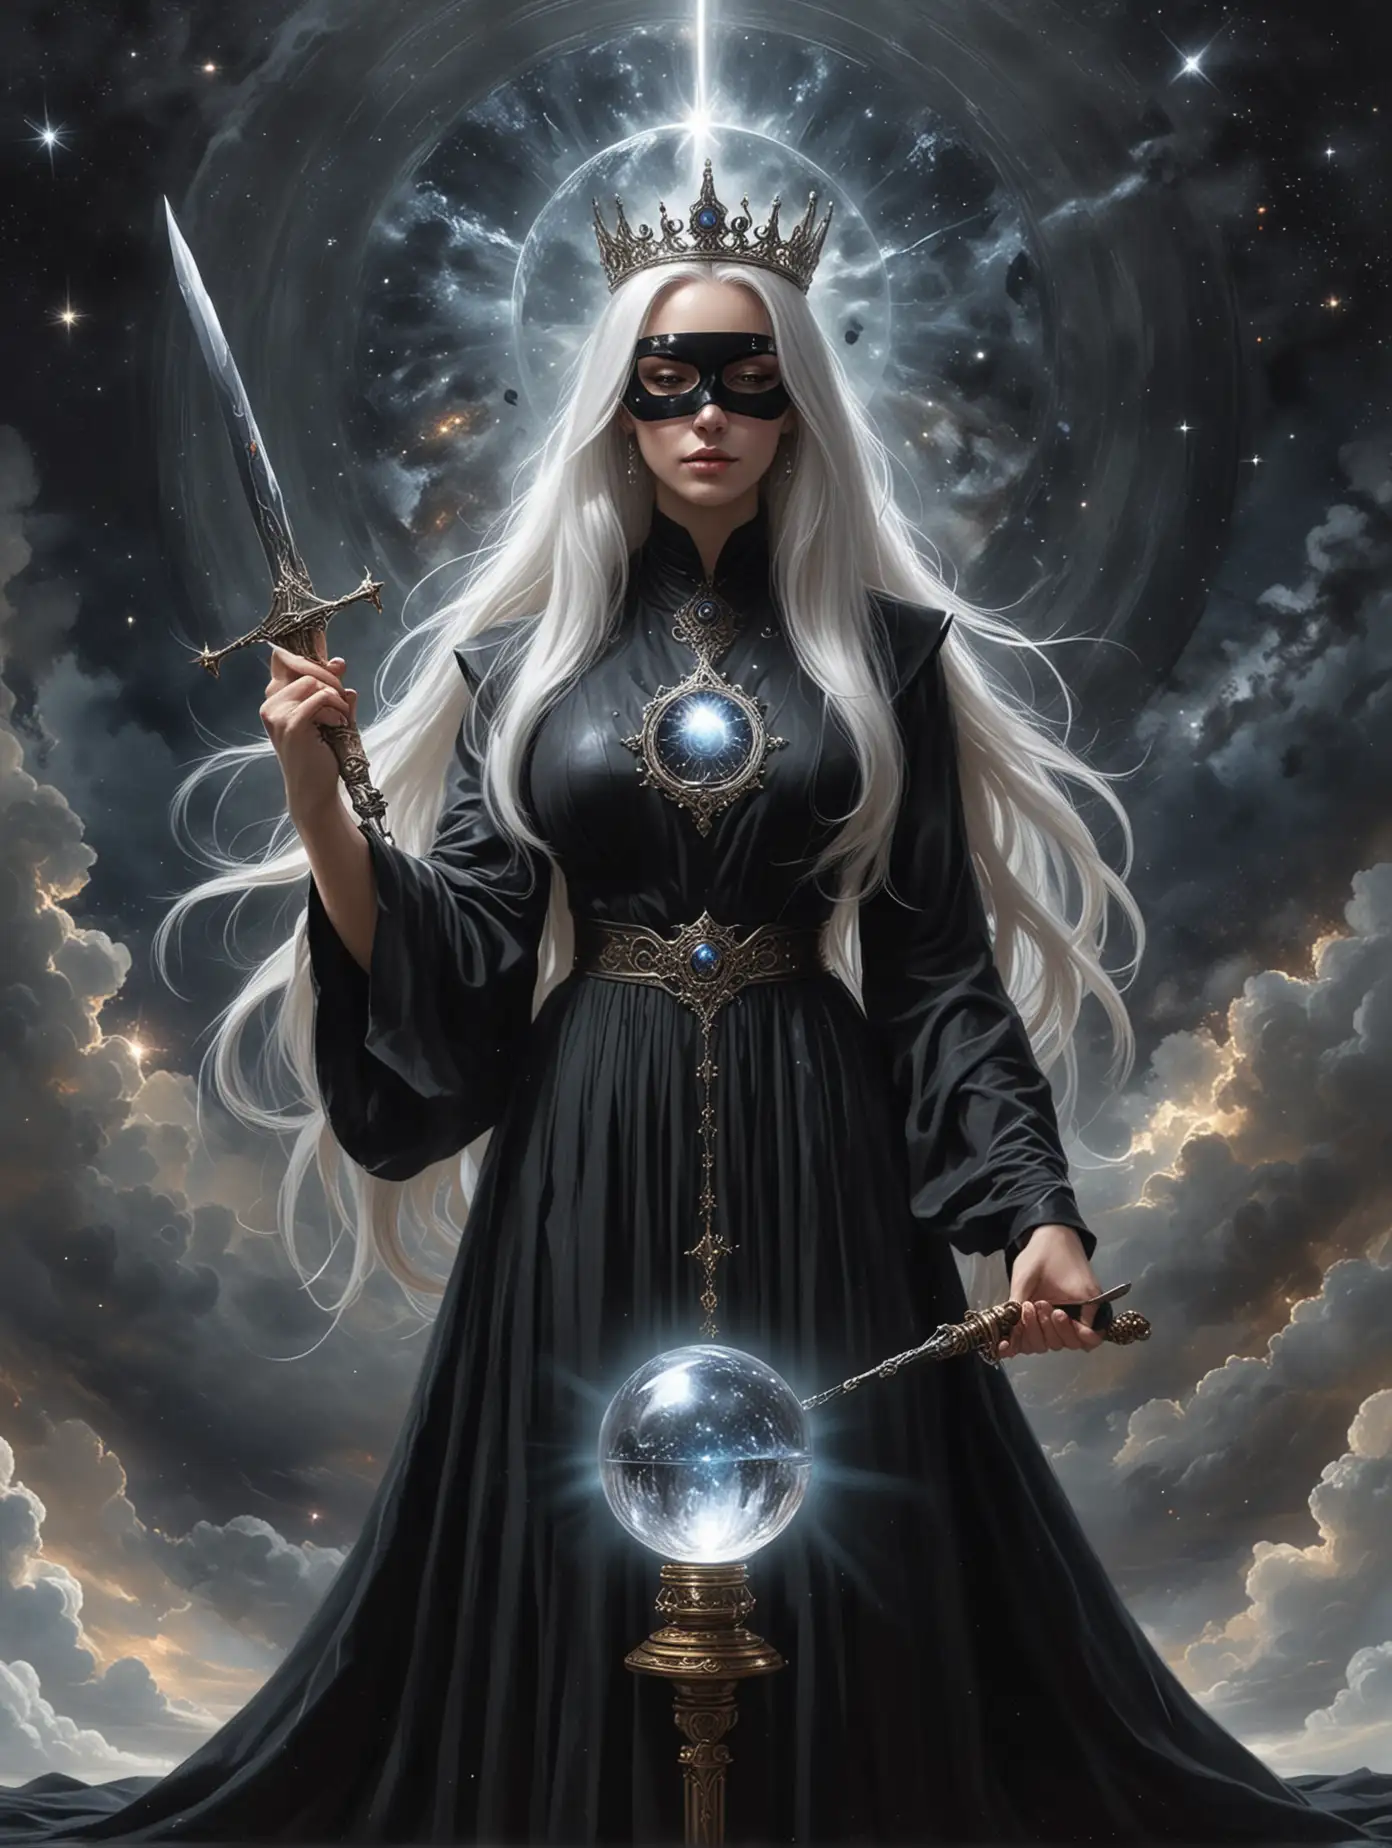 Mystical-Oracle-Woman-with-Iron-Sword-and-Crystal-Ball-in-Cosmos